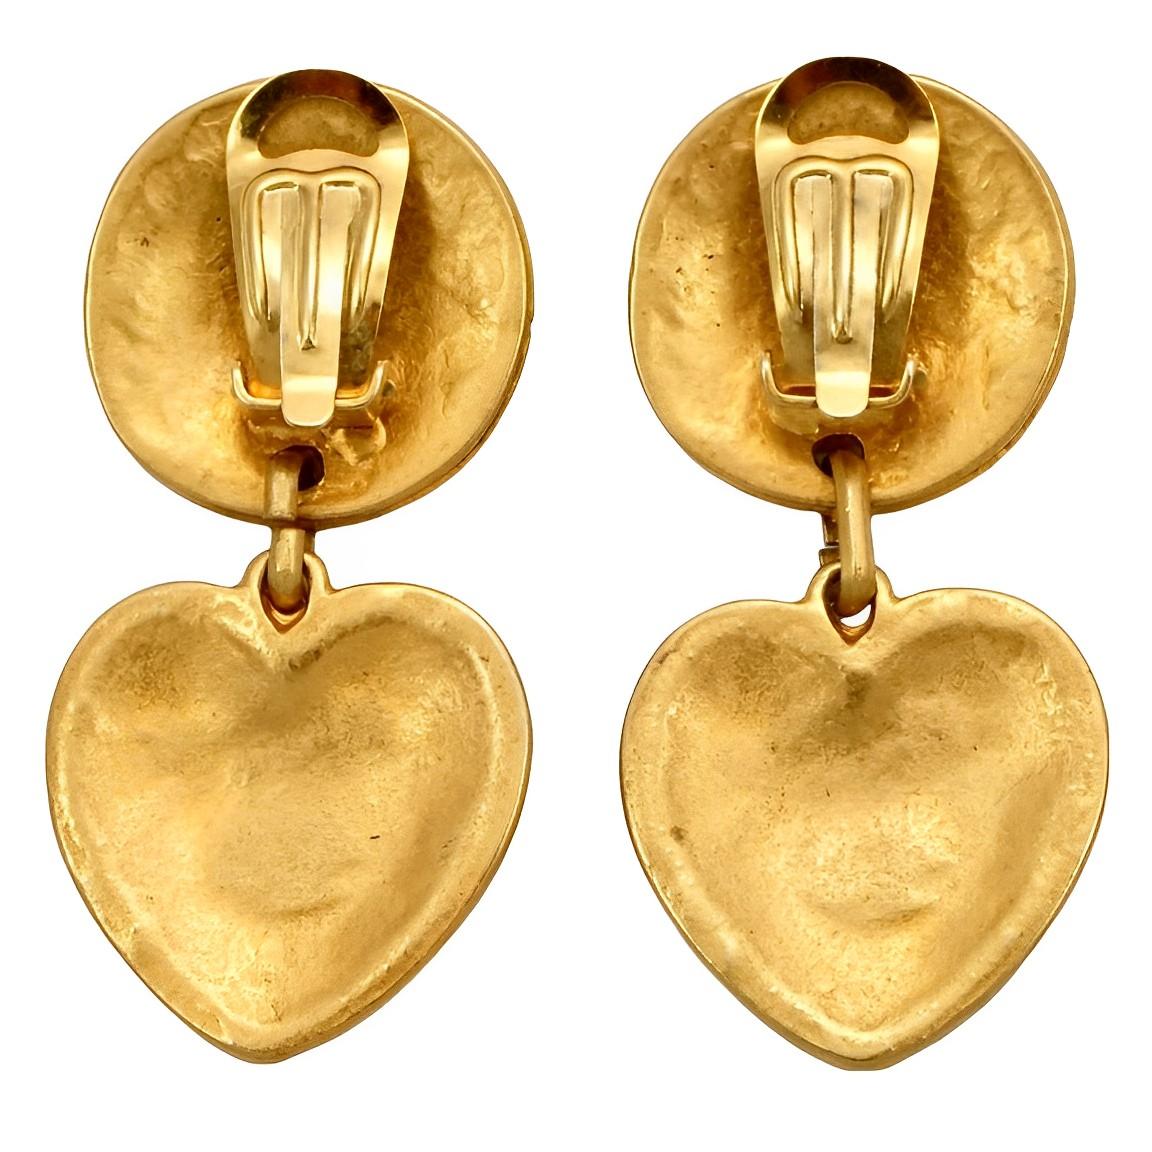 Beautiful matt gold plated Byzantine design heart clip on earrings. The earrings are stamped Italy. They are in the style of the French designer Edouard Rambaud.

Measuring length 5.6 cm / 2.2 inches by width approximately  2.5 cm / 1 inch. 

This